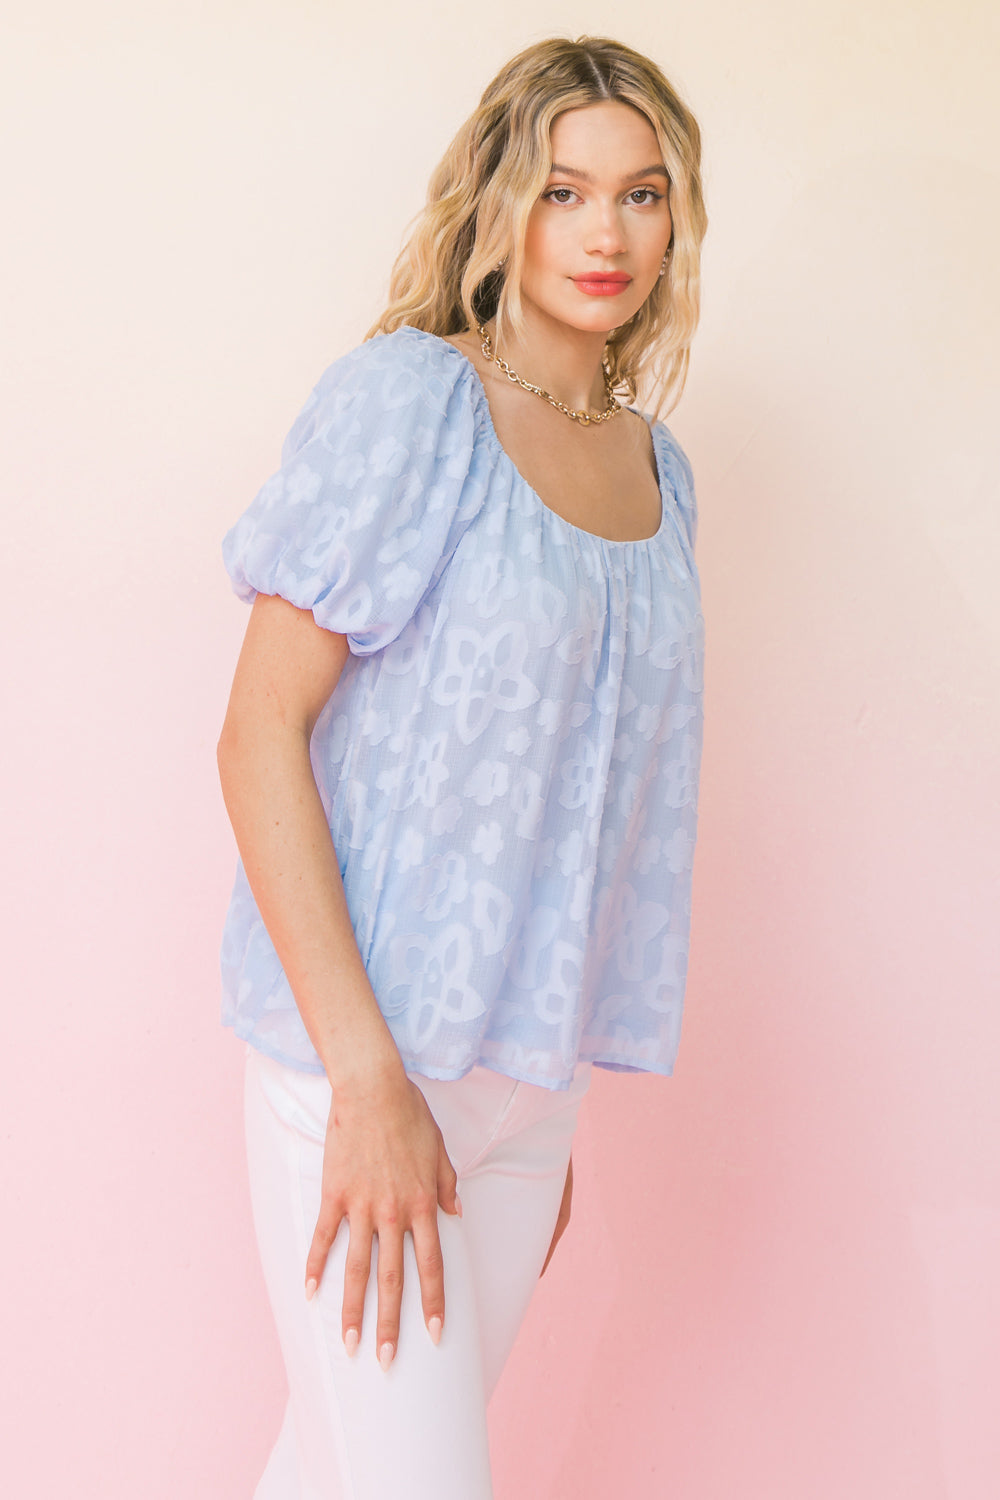 FULL OF FRILLS WOVEN TOP